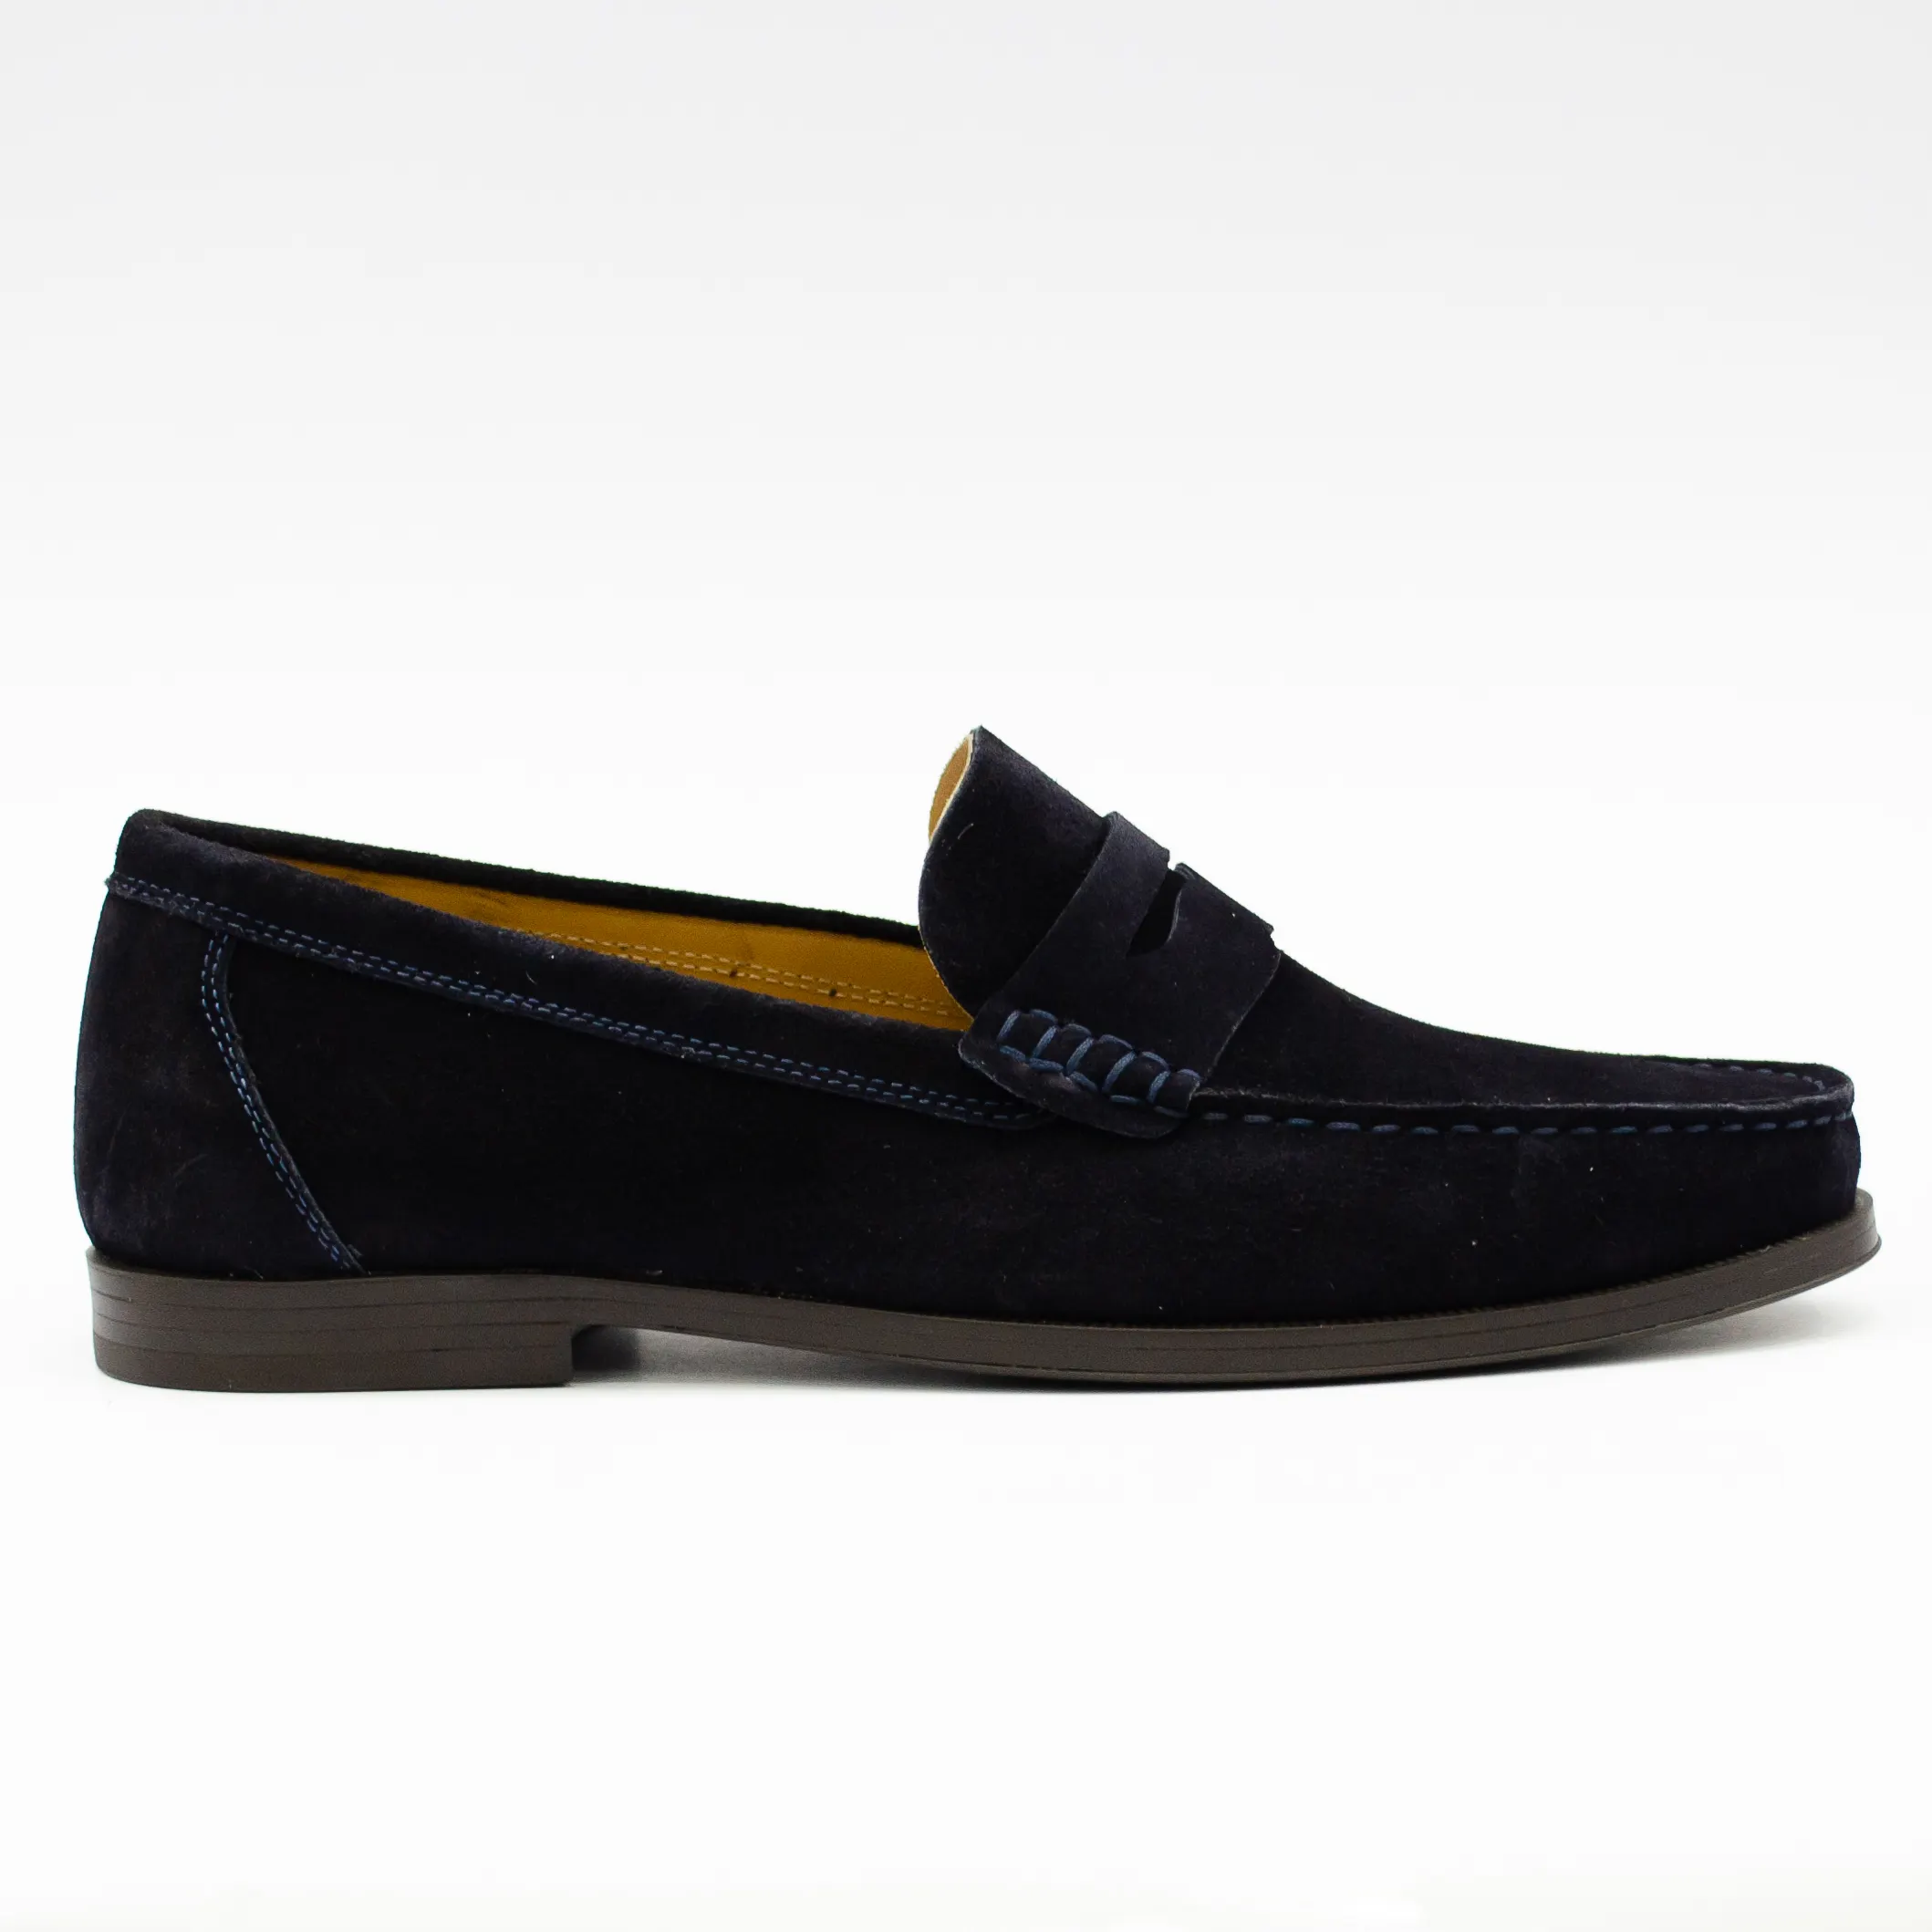 DV420 SUEDE BLUE MOCCASIN DRIVING SHOES MADE IN ITALY. AVAILABLE IN ALL COLORS. MADE IN ITALY WITH GENUINE LEATHER